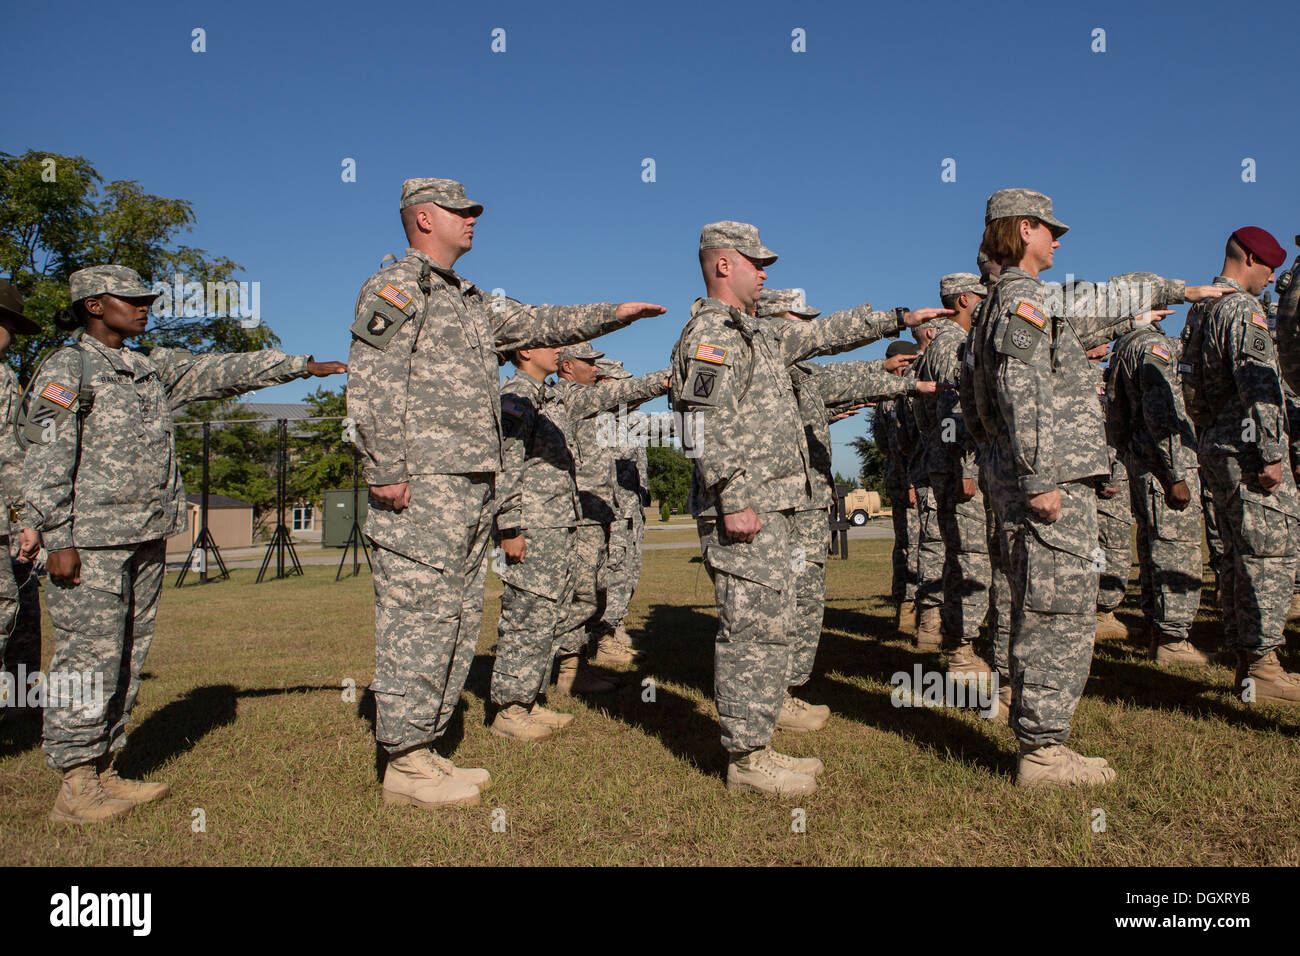 Male and female Drill Sergeant candidates at the US Army Drill Instructors School Fort Jackson during close order drill exercises September 27, 2013 in Columbia, SC. While 14 percent of the Army is women soldiers there is a shortage of female Drill Sergeants. Stock Photo